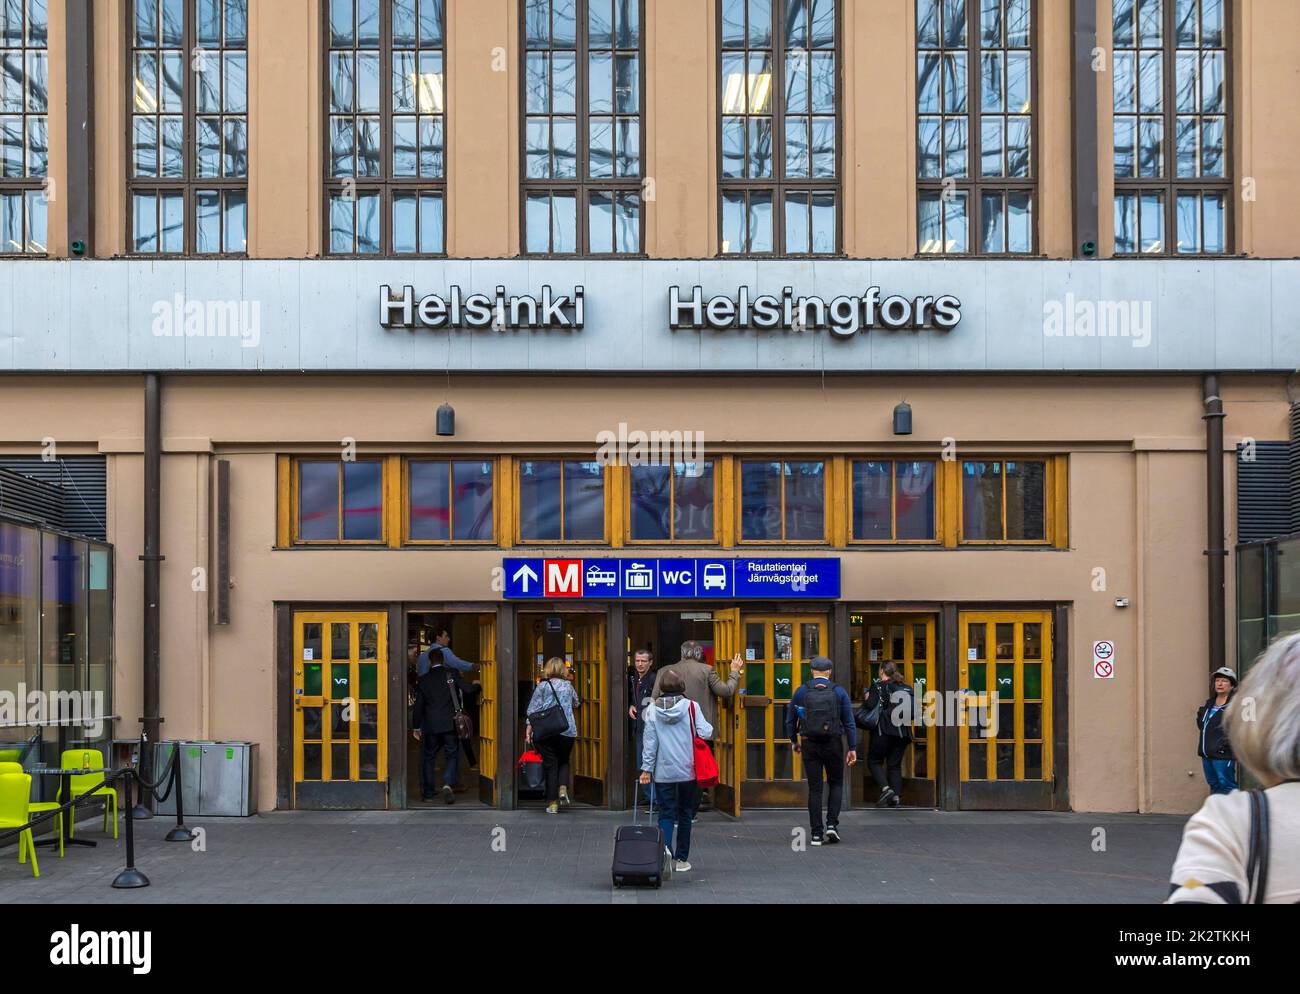 Helsinki, Finland - September 3, 2019: Passangers enter to the Helsinki Central Station (Finnish: Helsingin paarautatieasema) (HEC) and the Central Ra Stock Photo